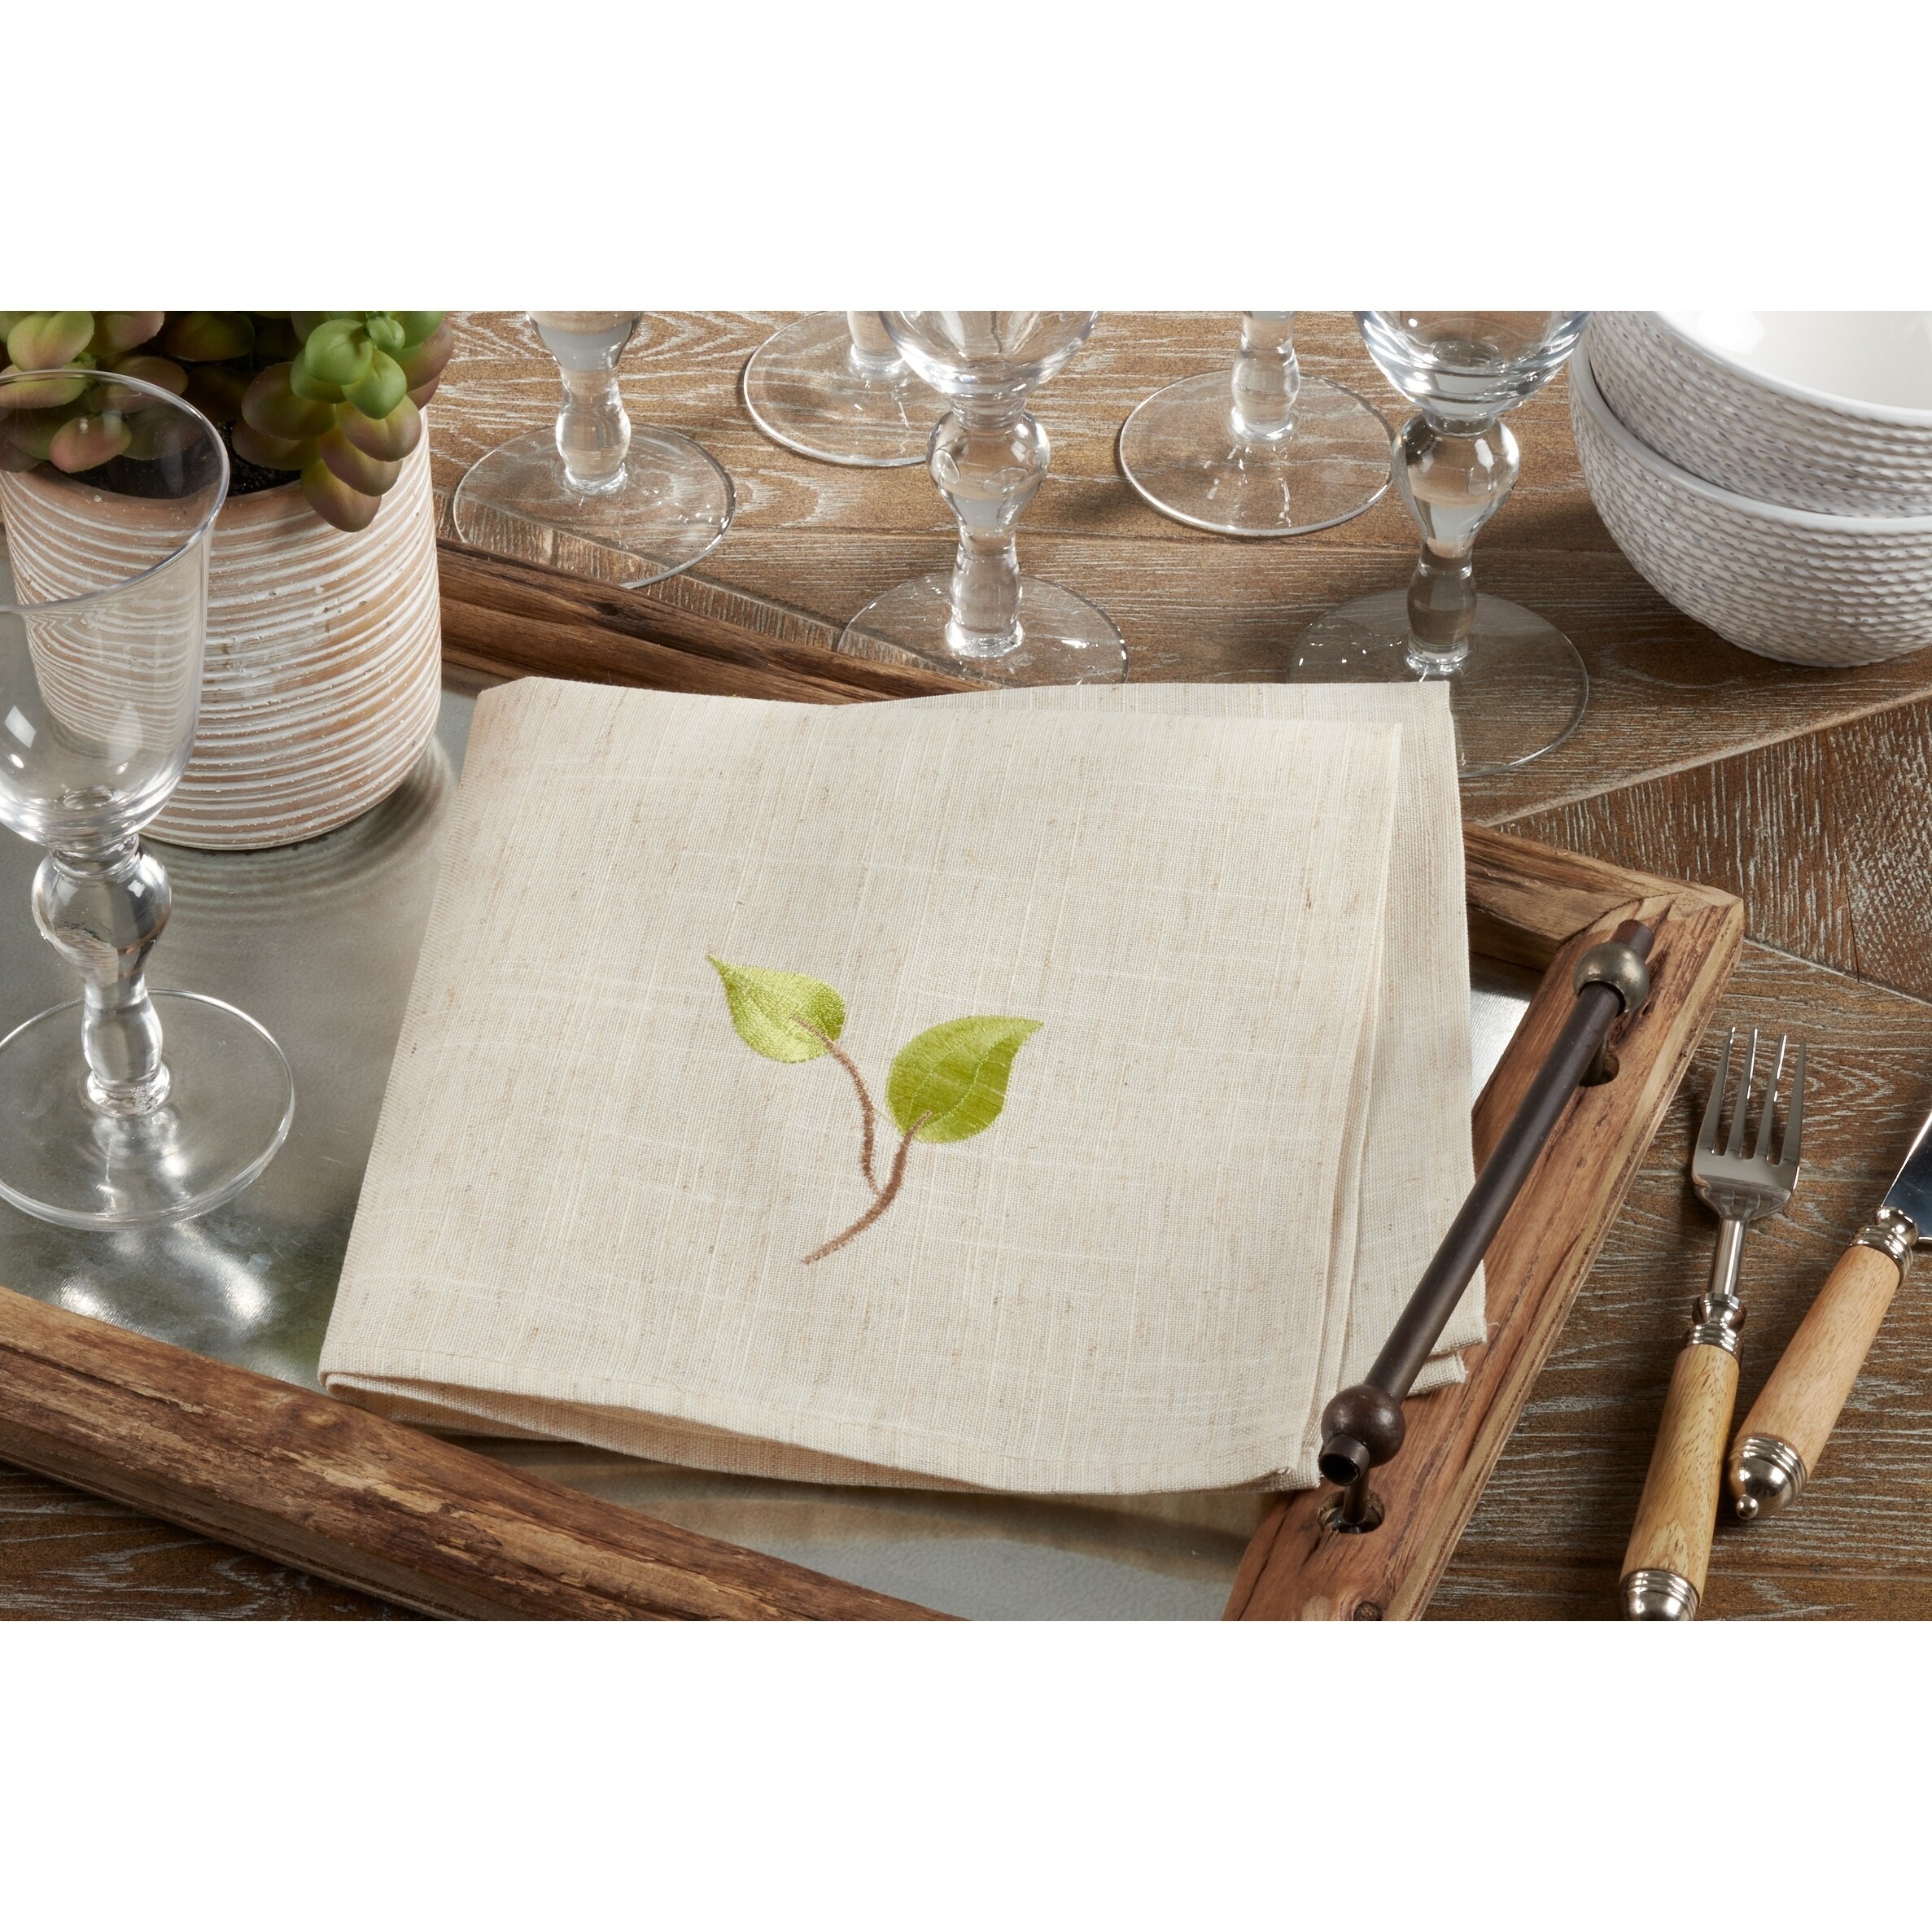 Embroidered Table Napkins with Vine Design (Set of 4) - 20" x 20"